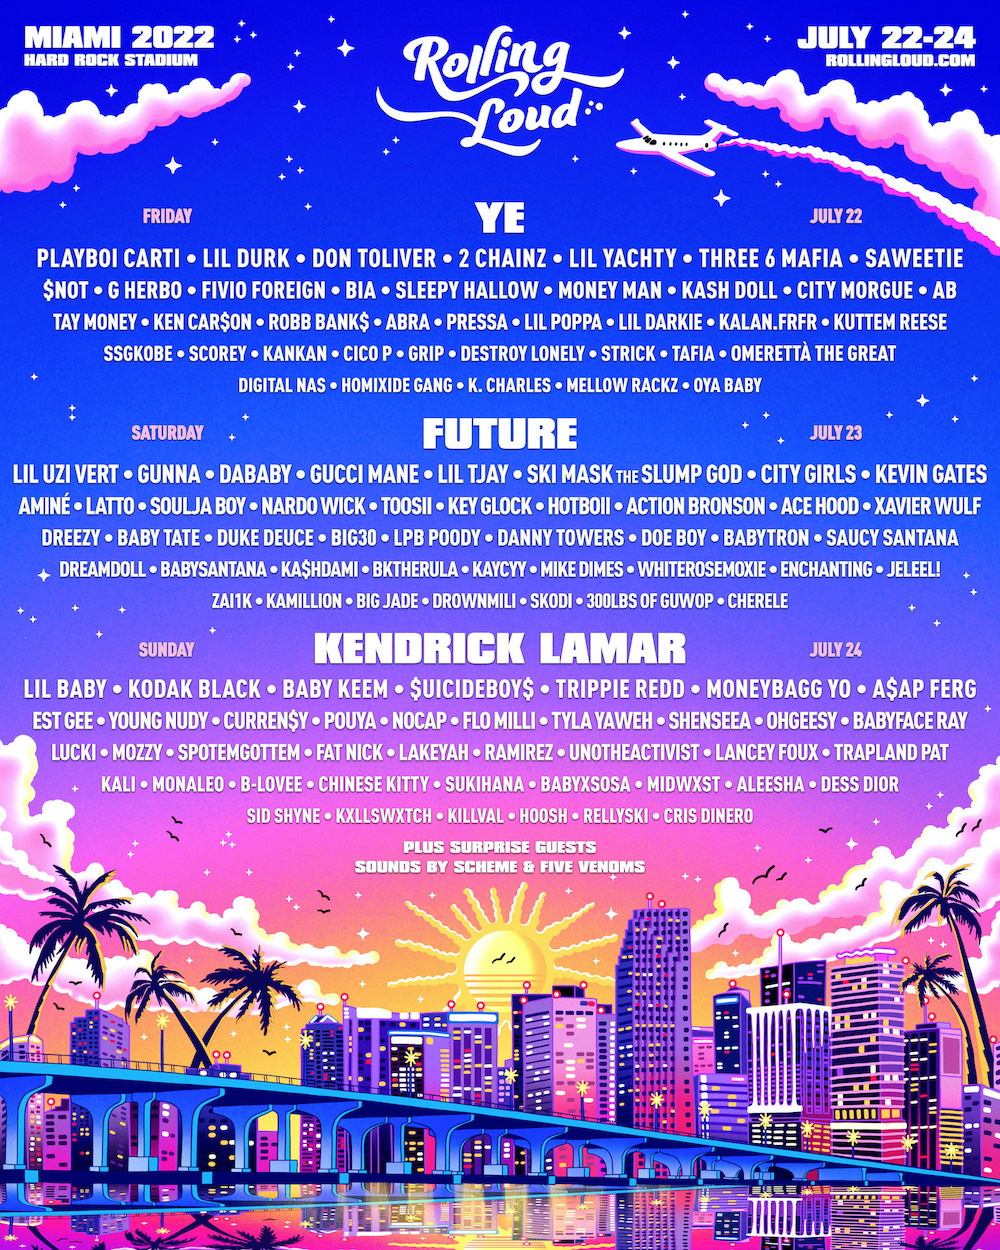 Rolling Loud Miami Lineup 2022 Kanye West, Future, Kendrick Lamar and more